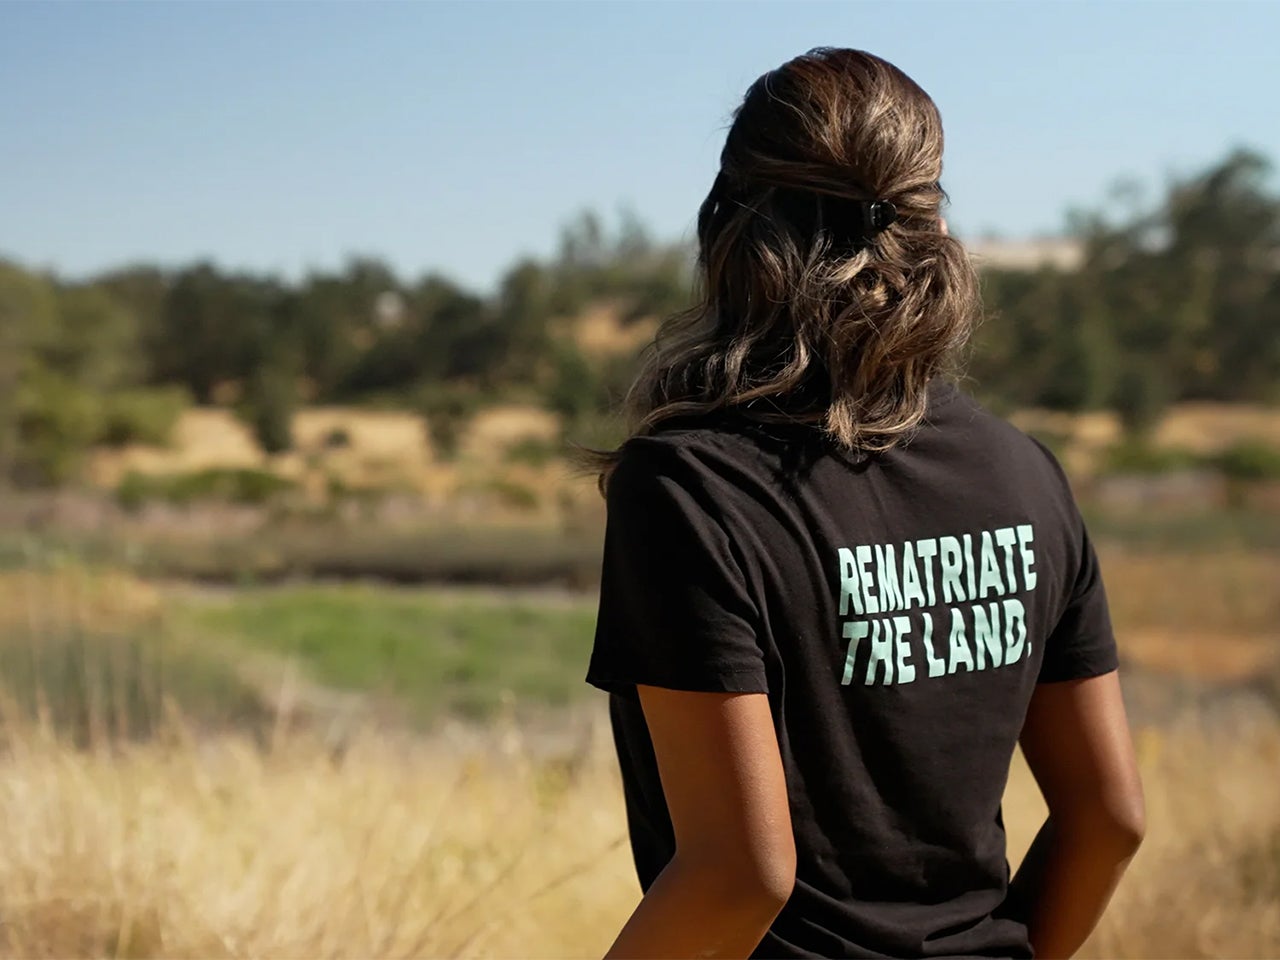 Melinda Adams looks out at a field. The back of her black shirt reads in light blue text: “Rematriate the land.”